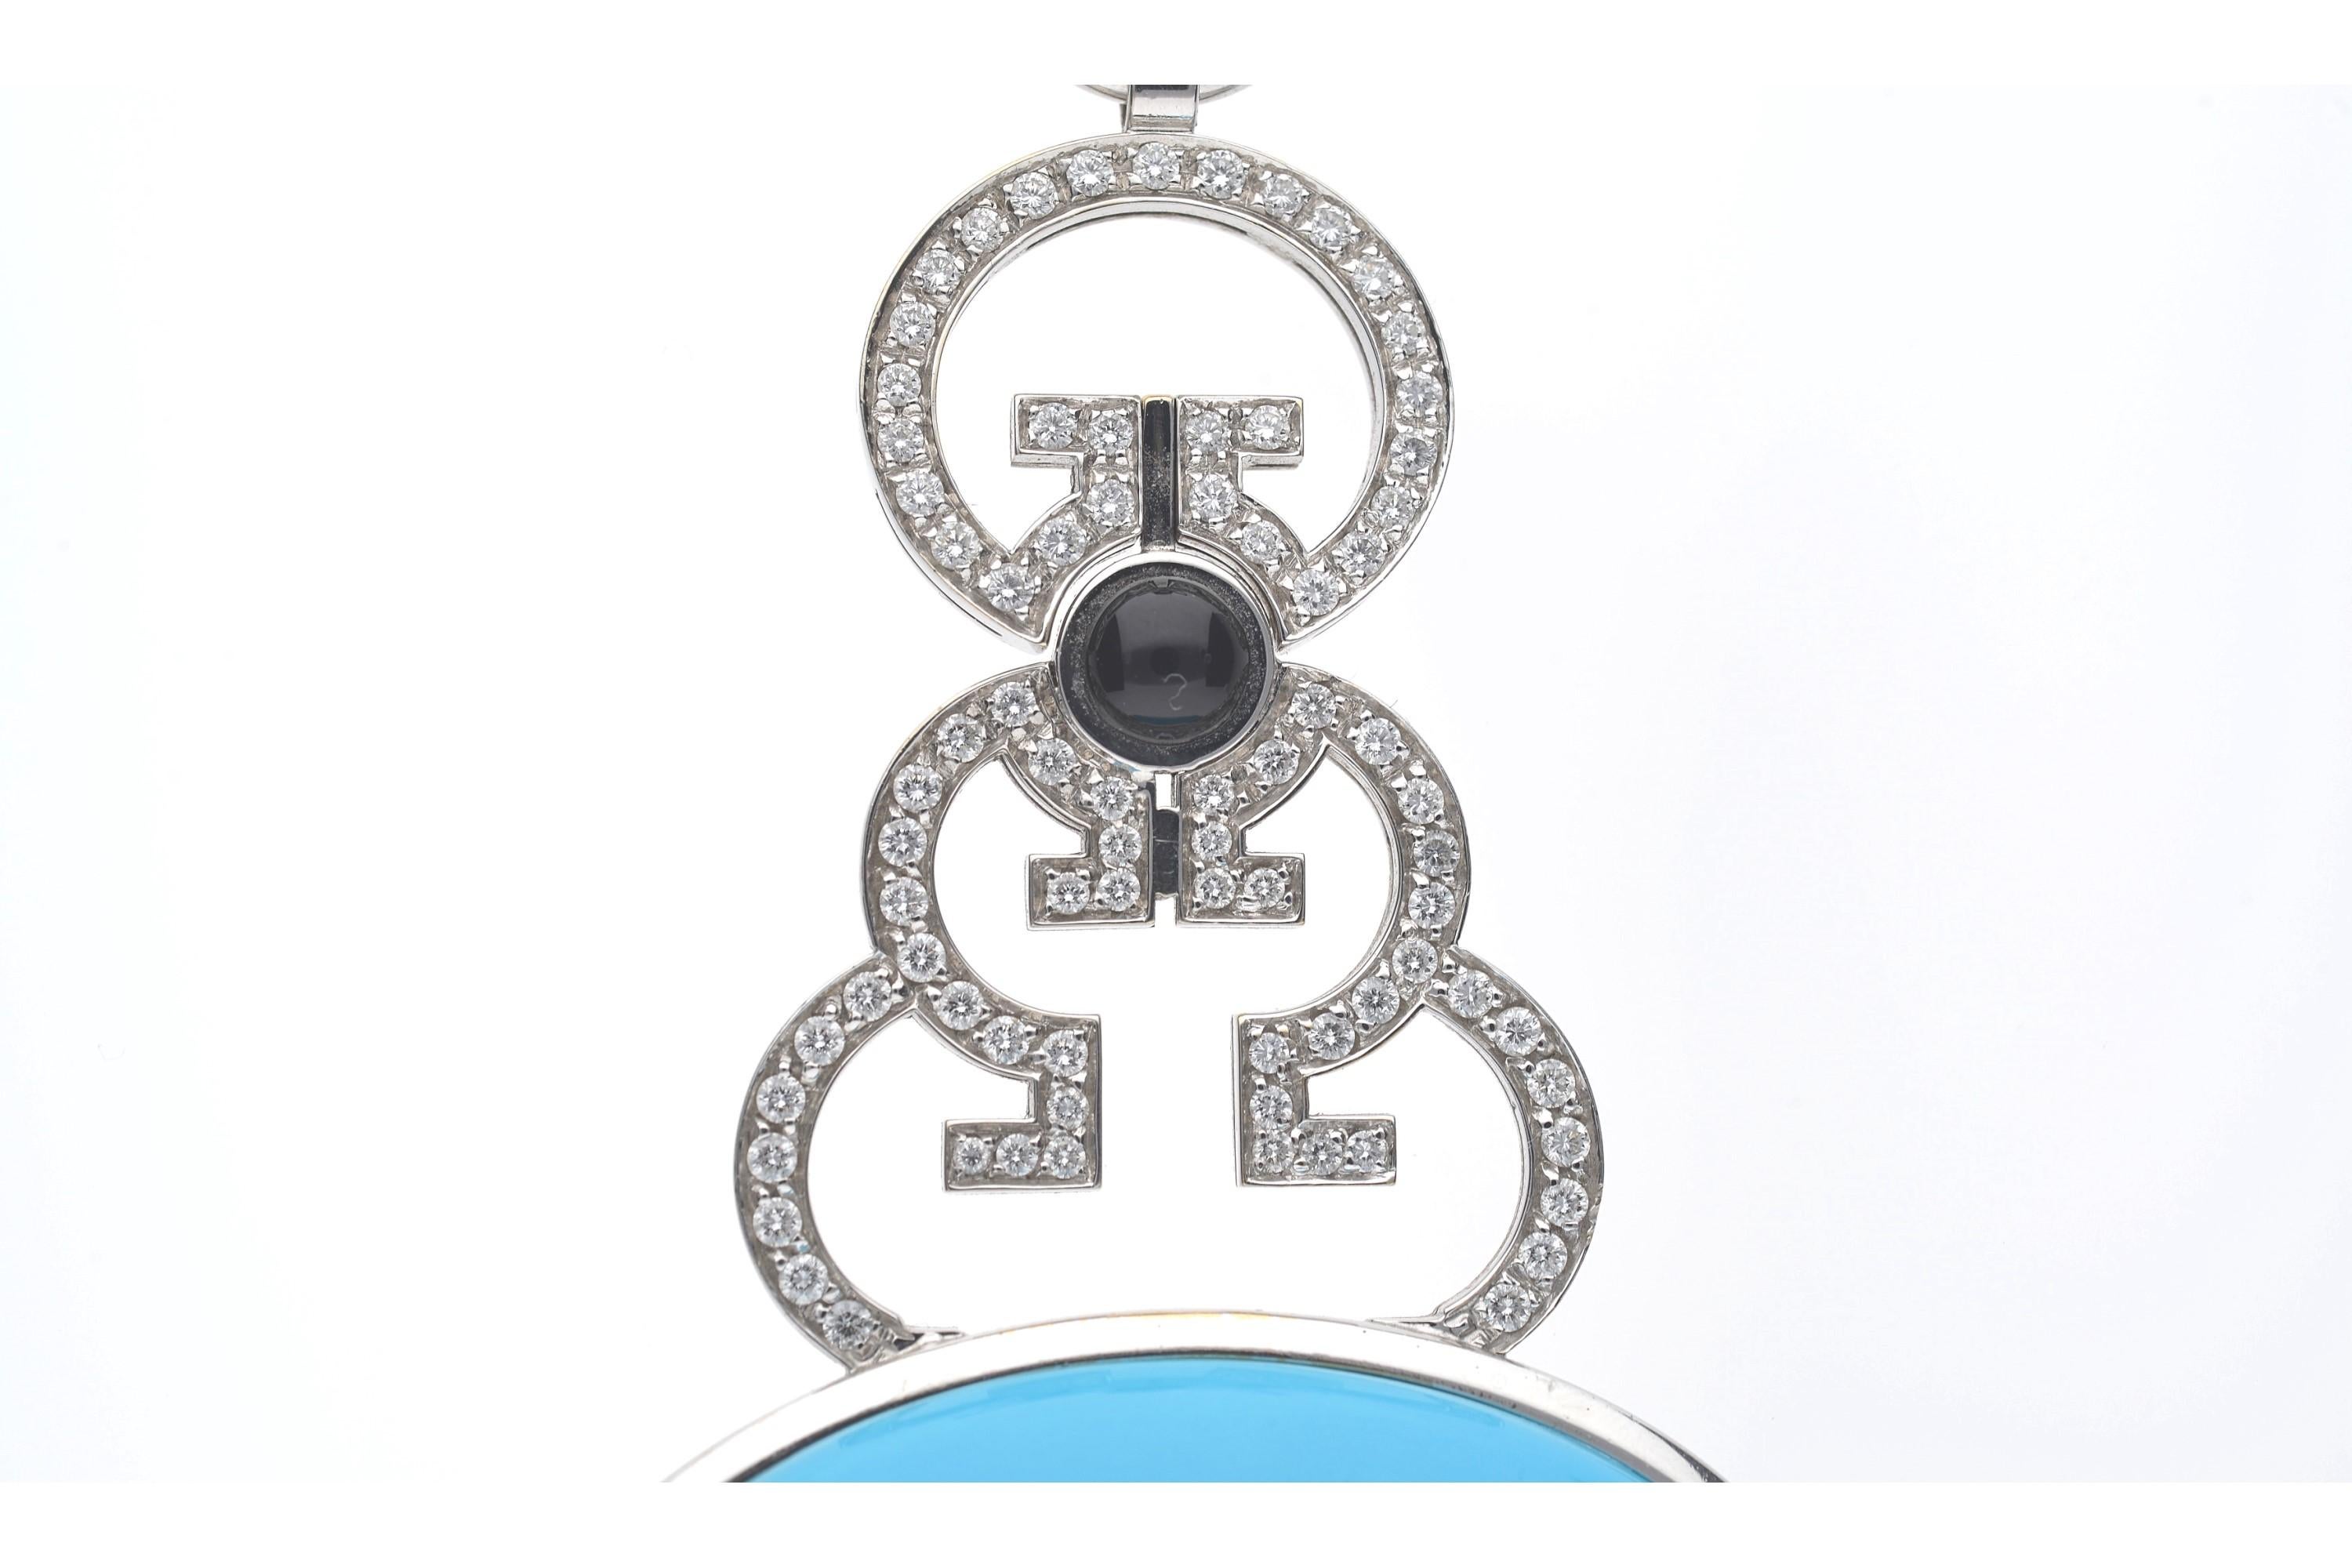 Pendant with Cabochon Cut Oval Turquoise with Diamonds and Cabochon Cut Sapphire, with Silk Cord Stopped by a Ball in Onyx and 18 Kt White Gold. 
Hook Closure in 18 Kt White Gold and Two Onyx Balls. 
Italian Manufacture. 
•SINGLE  PIECE.

•THE